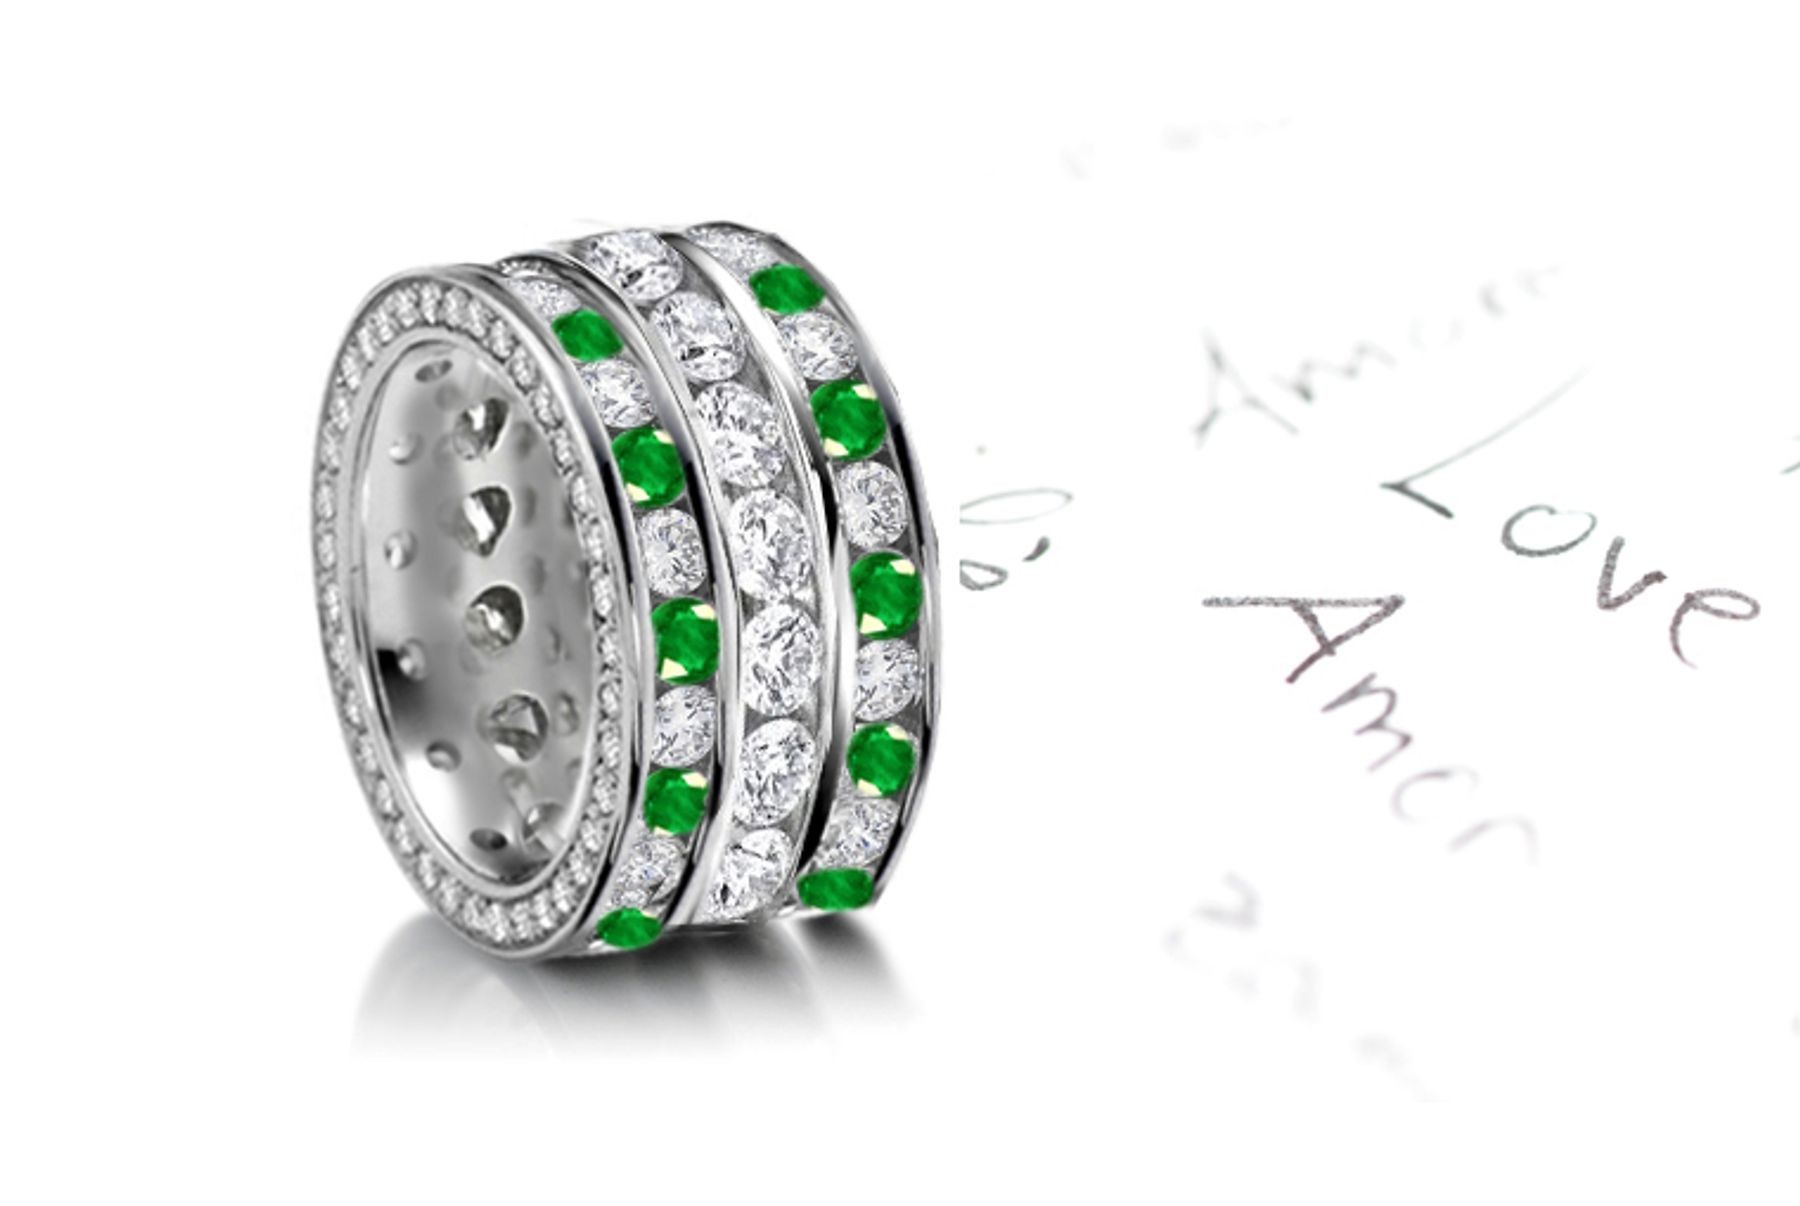 Truly Unique Beauty: Cocktail Emerald & Brilliant Diamond Wedding Ring in God mountings